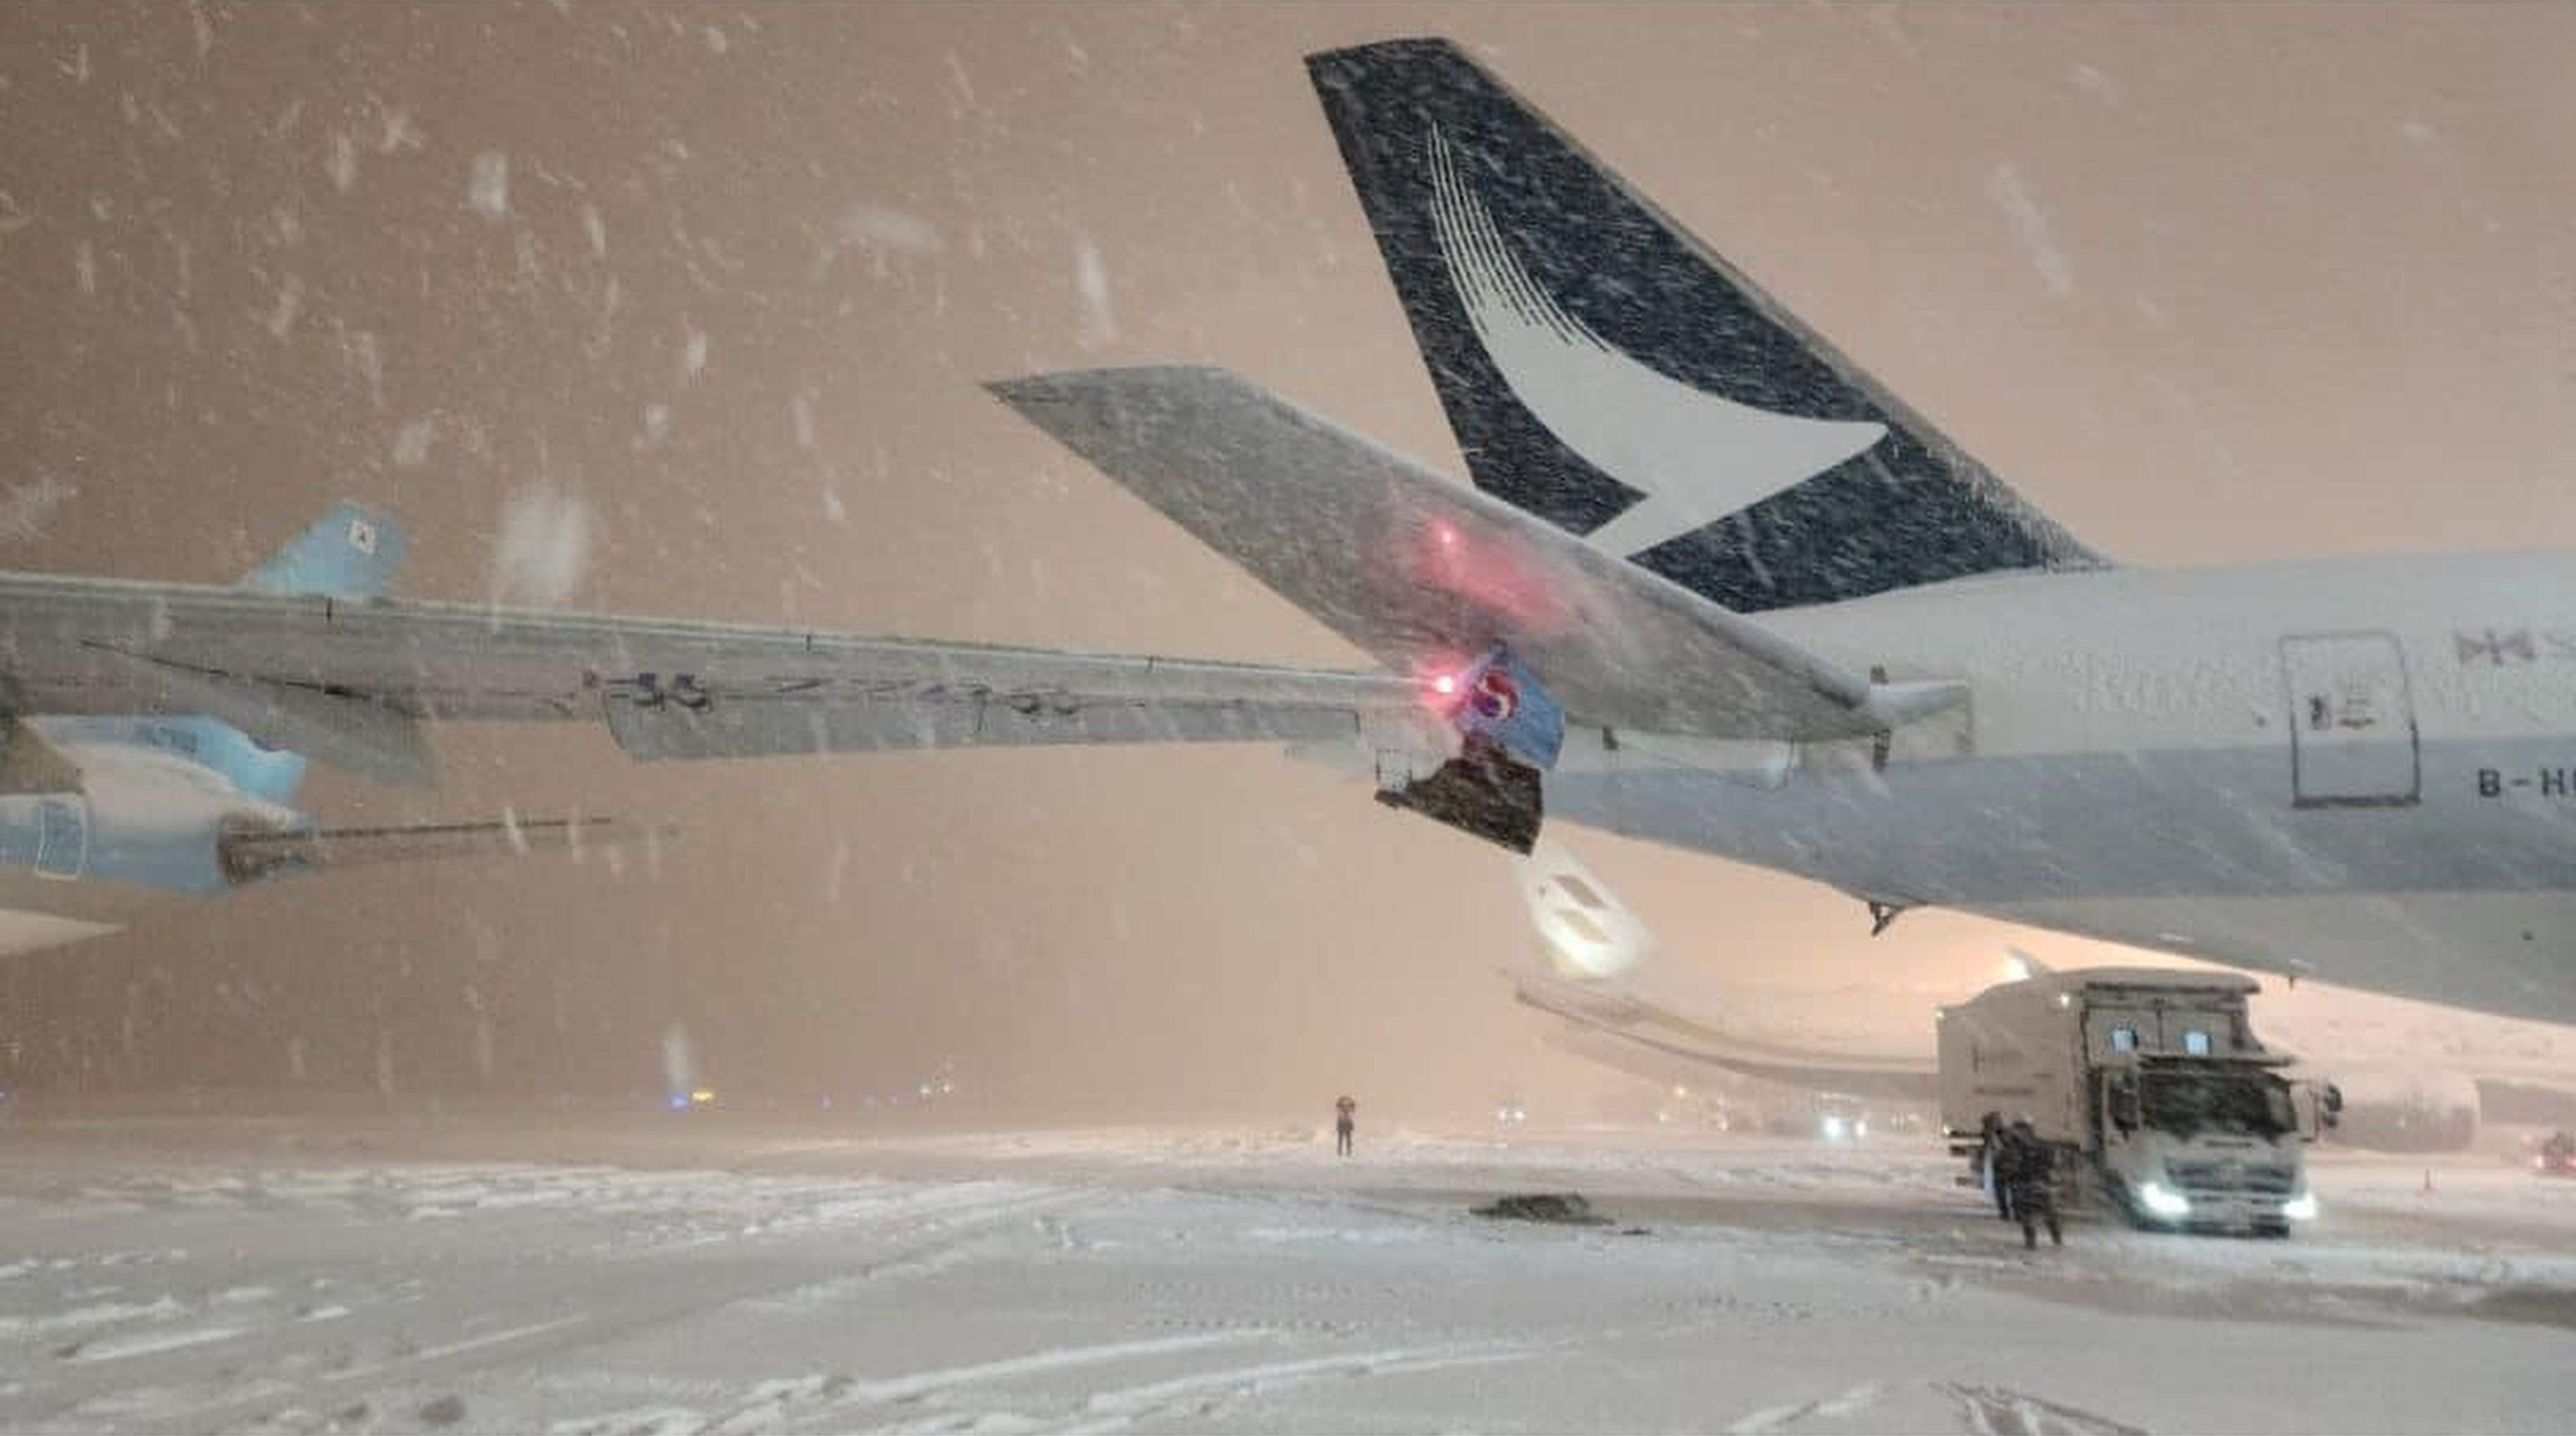 A Korean Air plane clipped a Cathay Pacific aircraft at the airport in Sapporo. Photo: Handout